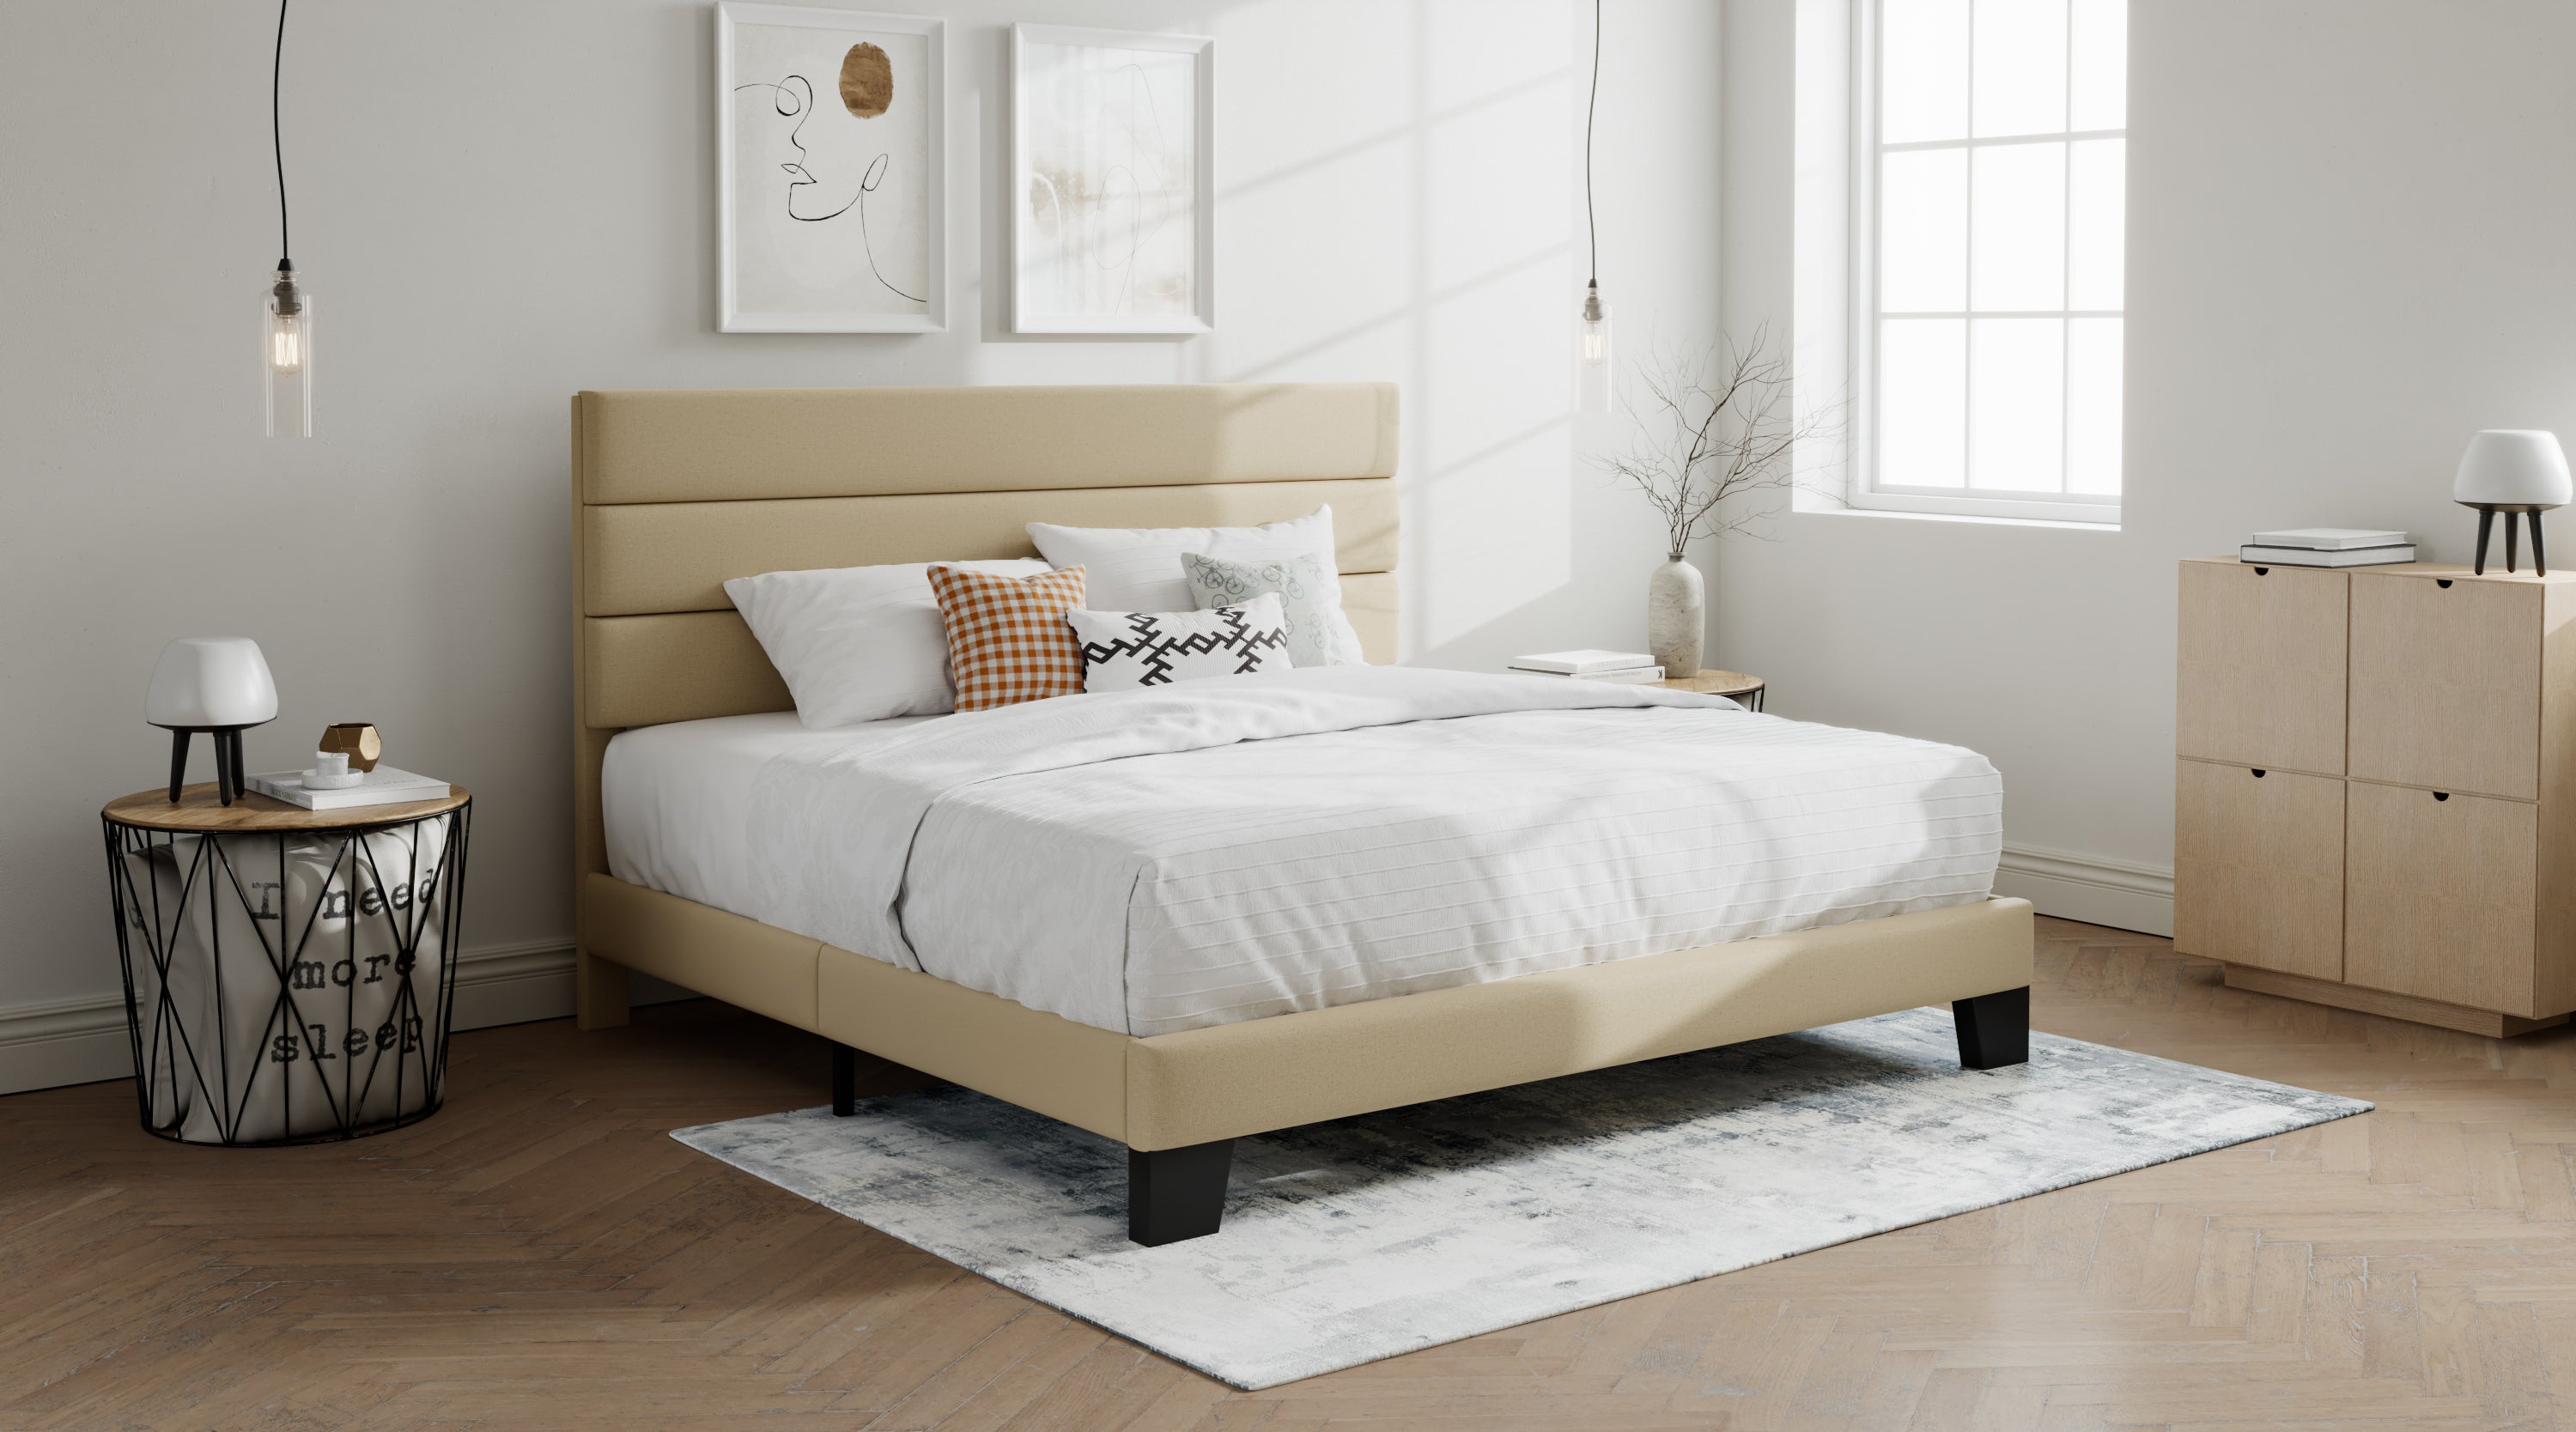 Platform Upholstered Bed, Fabric Bed Frame with Headboard and Wooden Slats